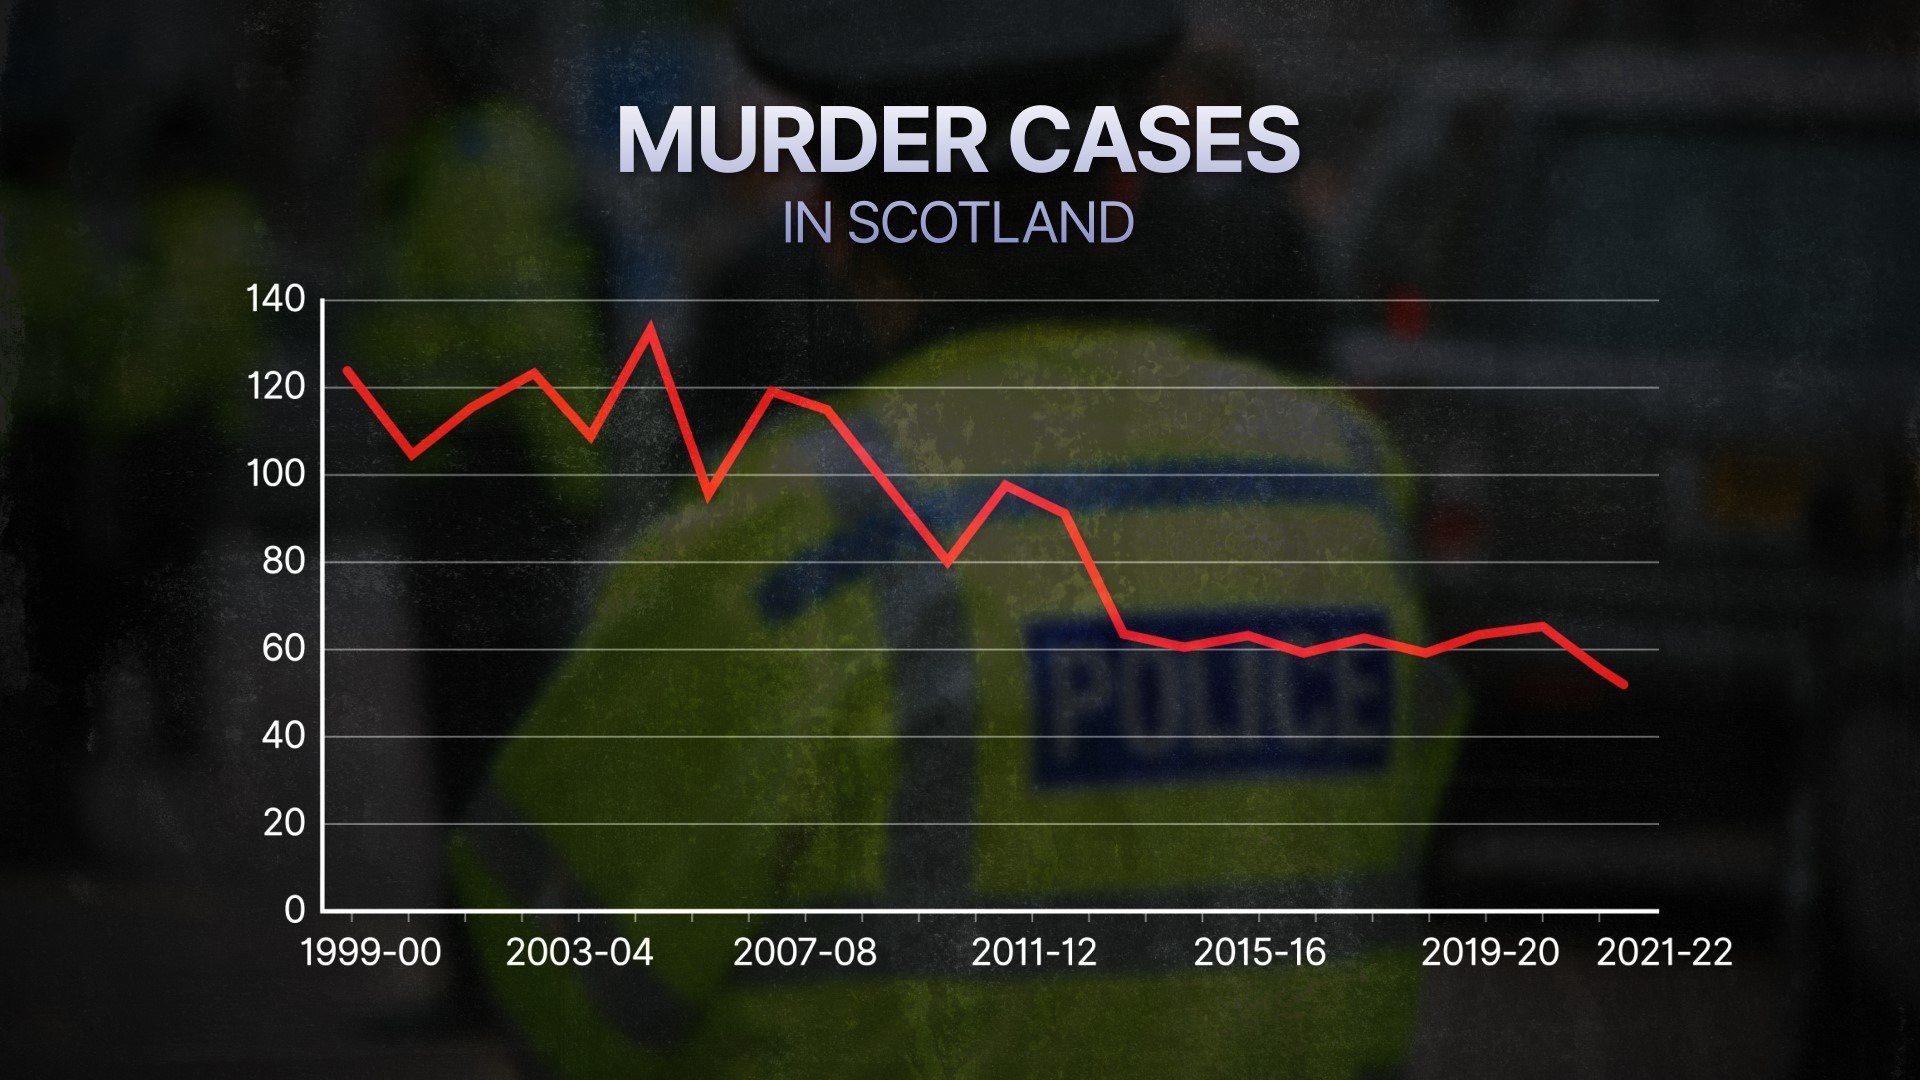 Scotland's murder rate falls to lowest level since modern records began.